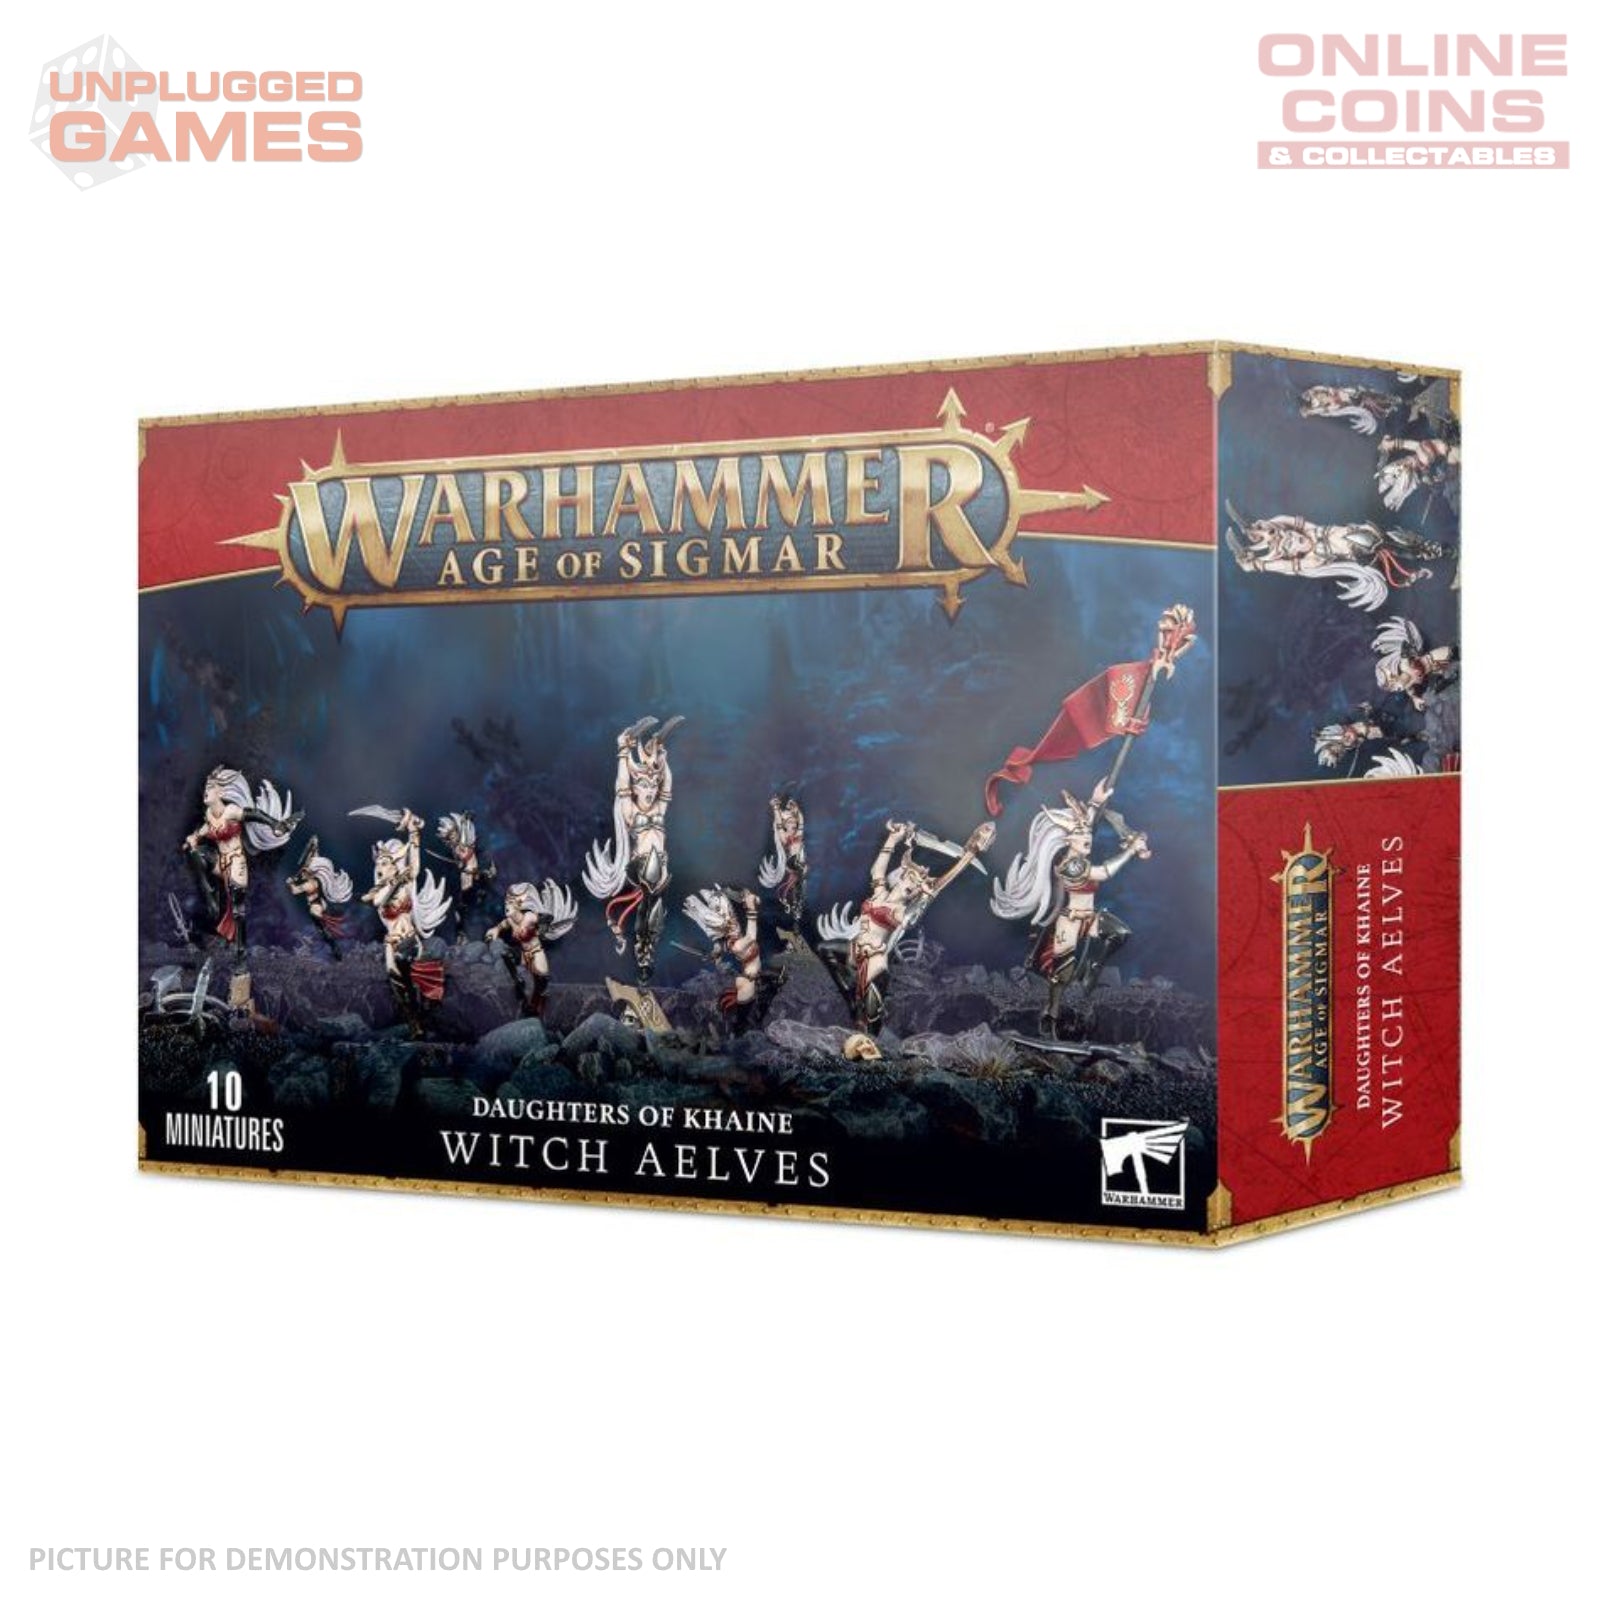 Warhammer Age of Sigmar - Daughters of Khaine Witch Aelves